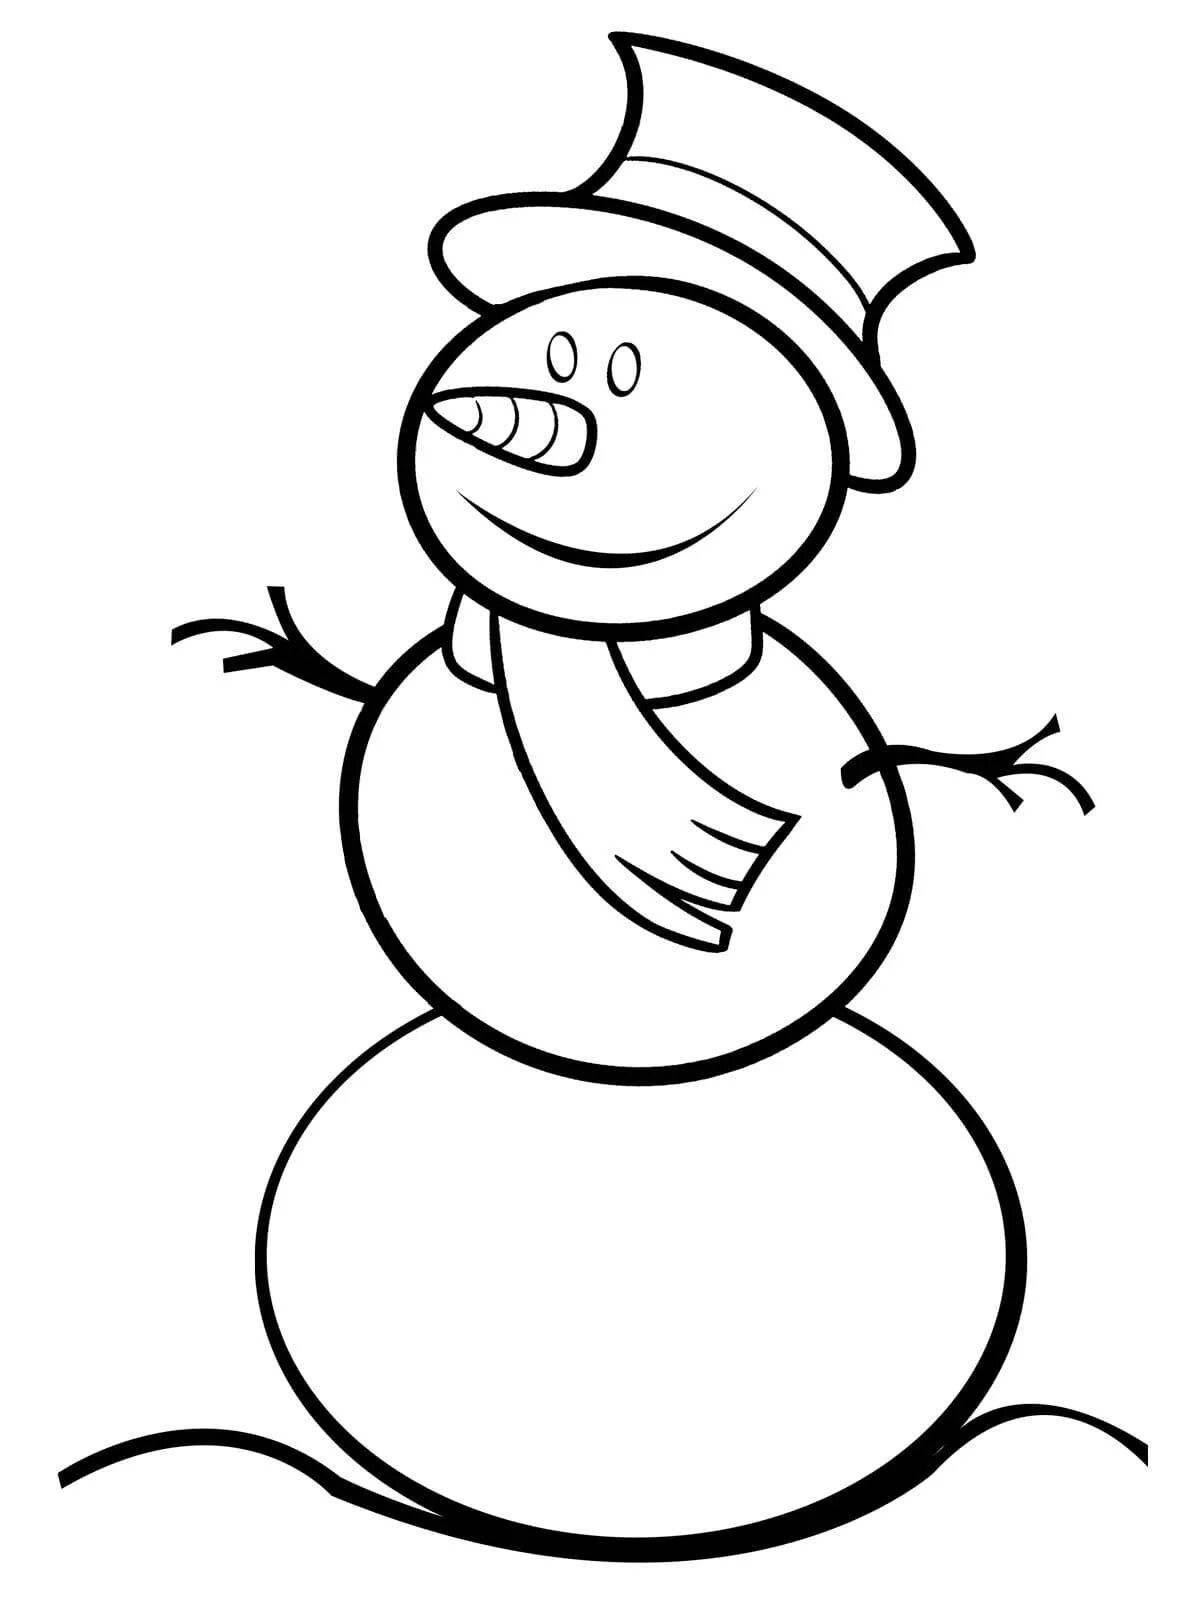 A fun snowman coloring book for kids 3 4